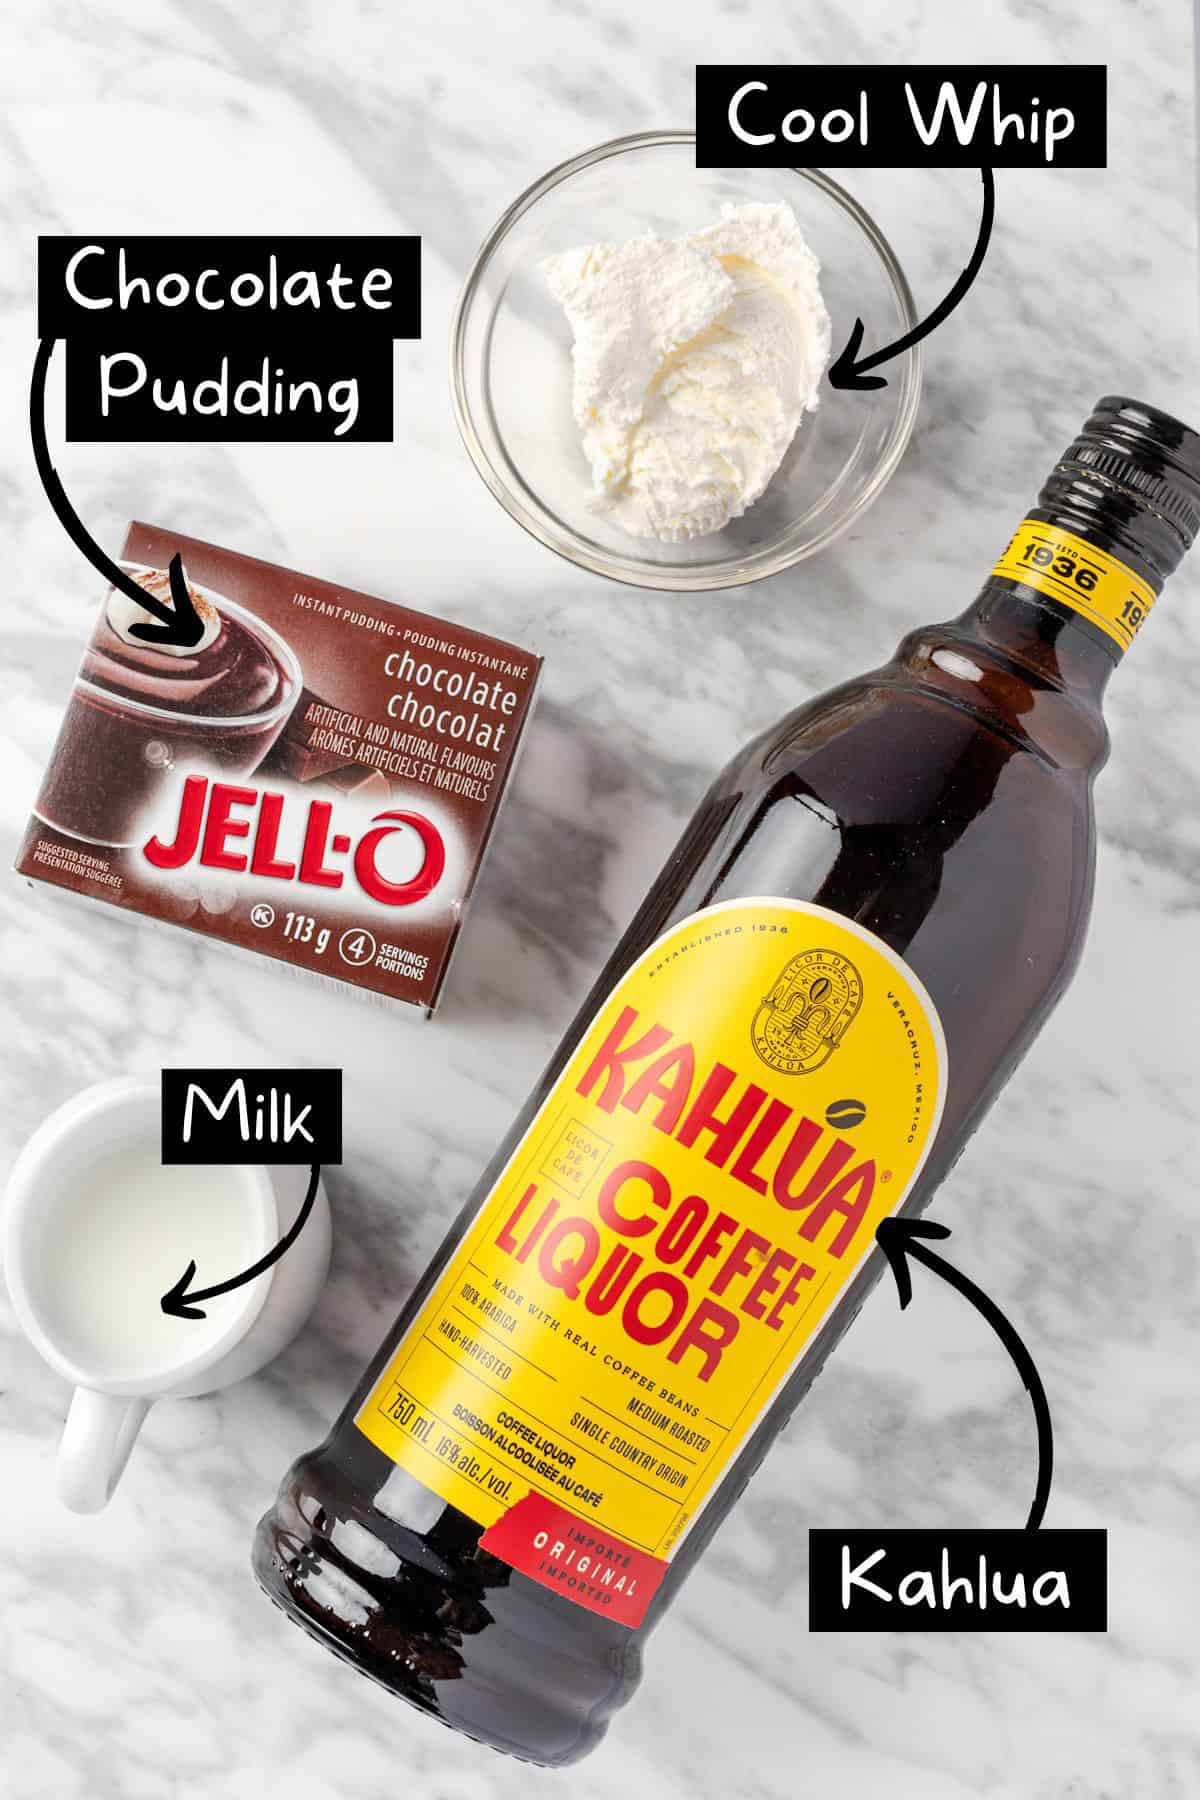 The ingredients needed for the pudding shots with Kahlua.